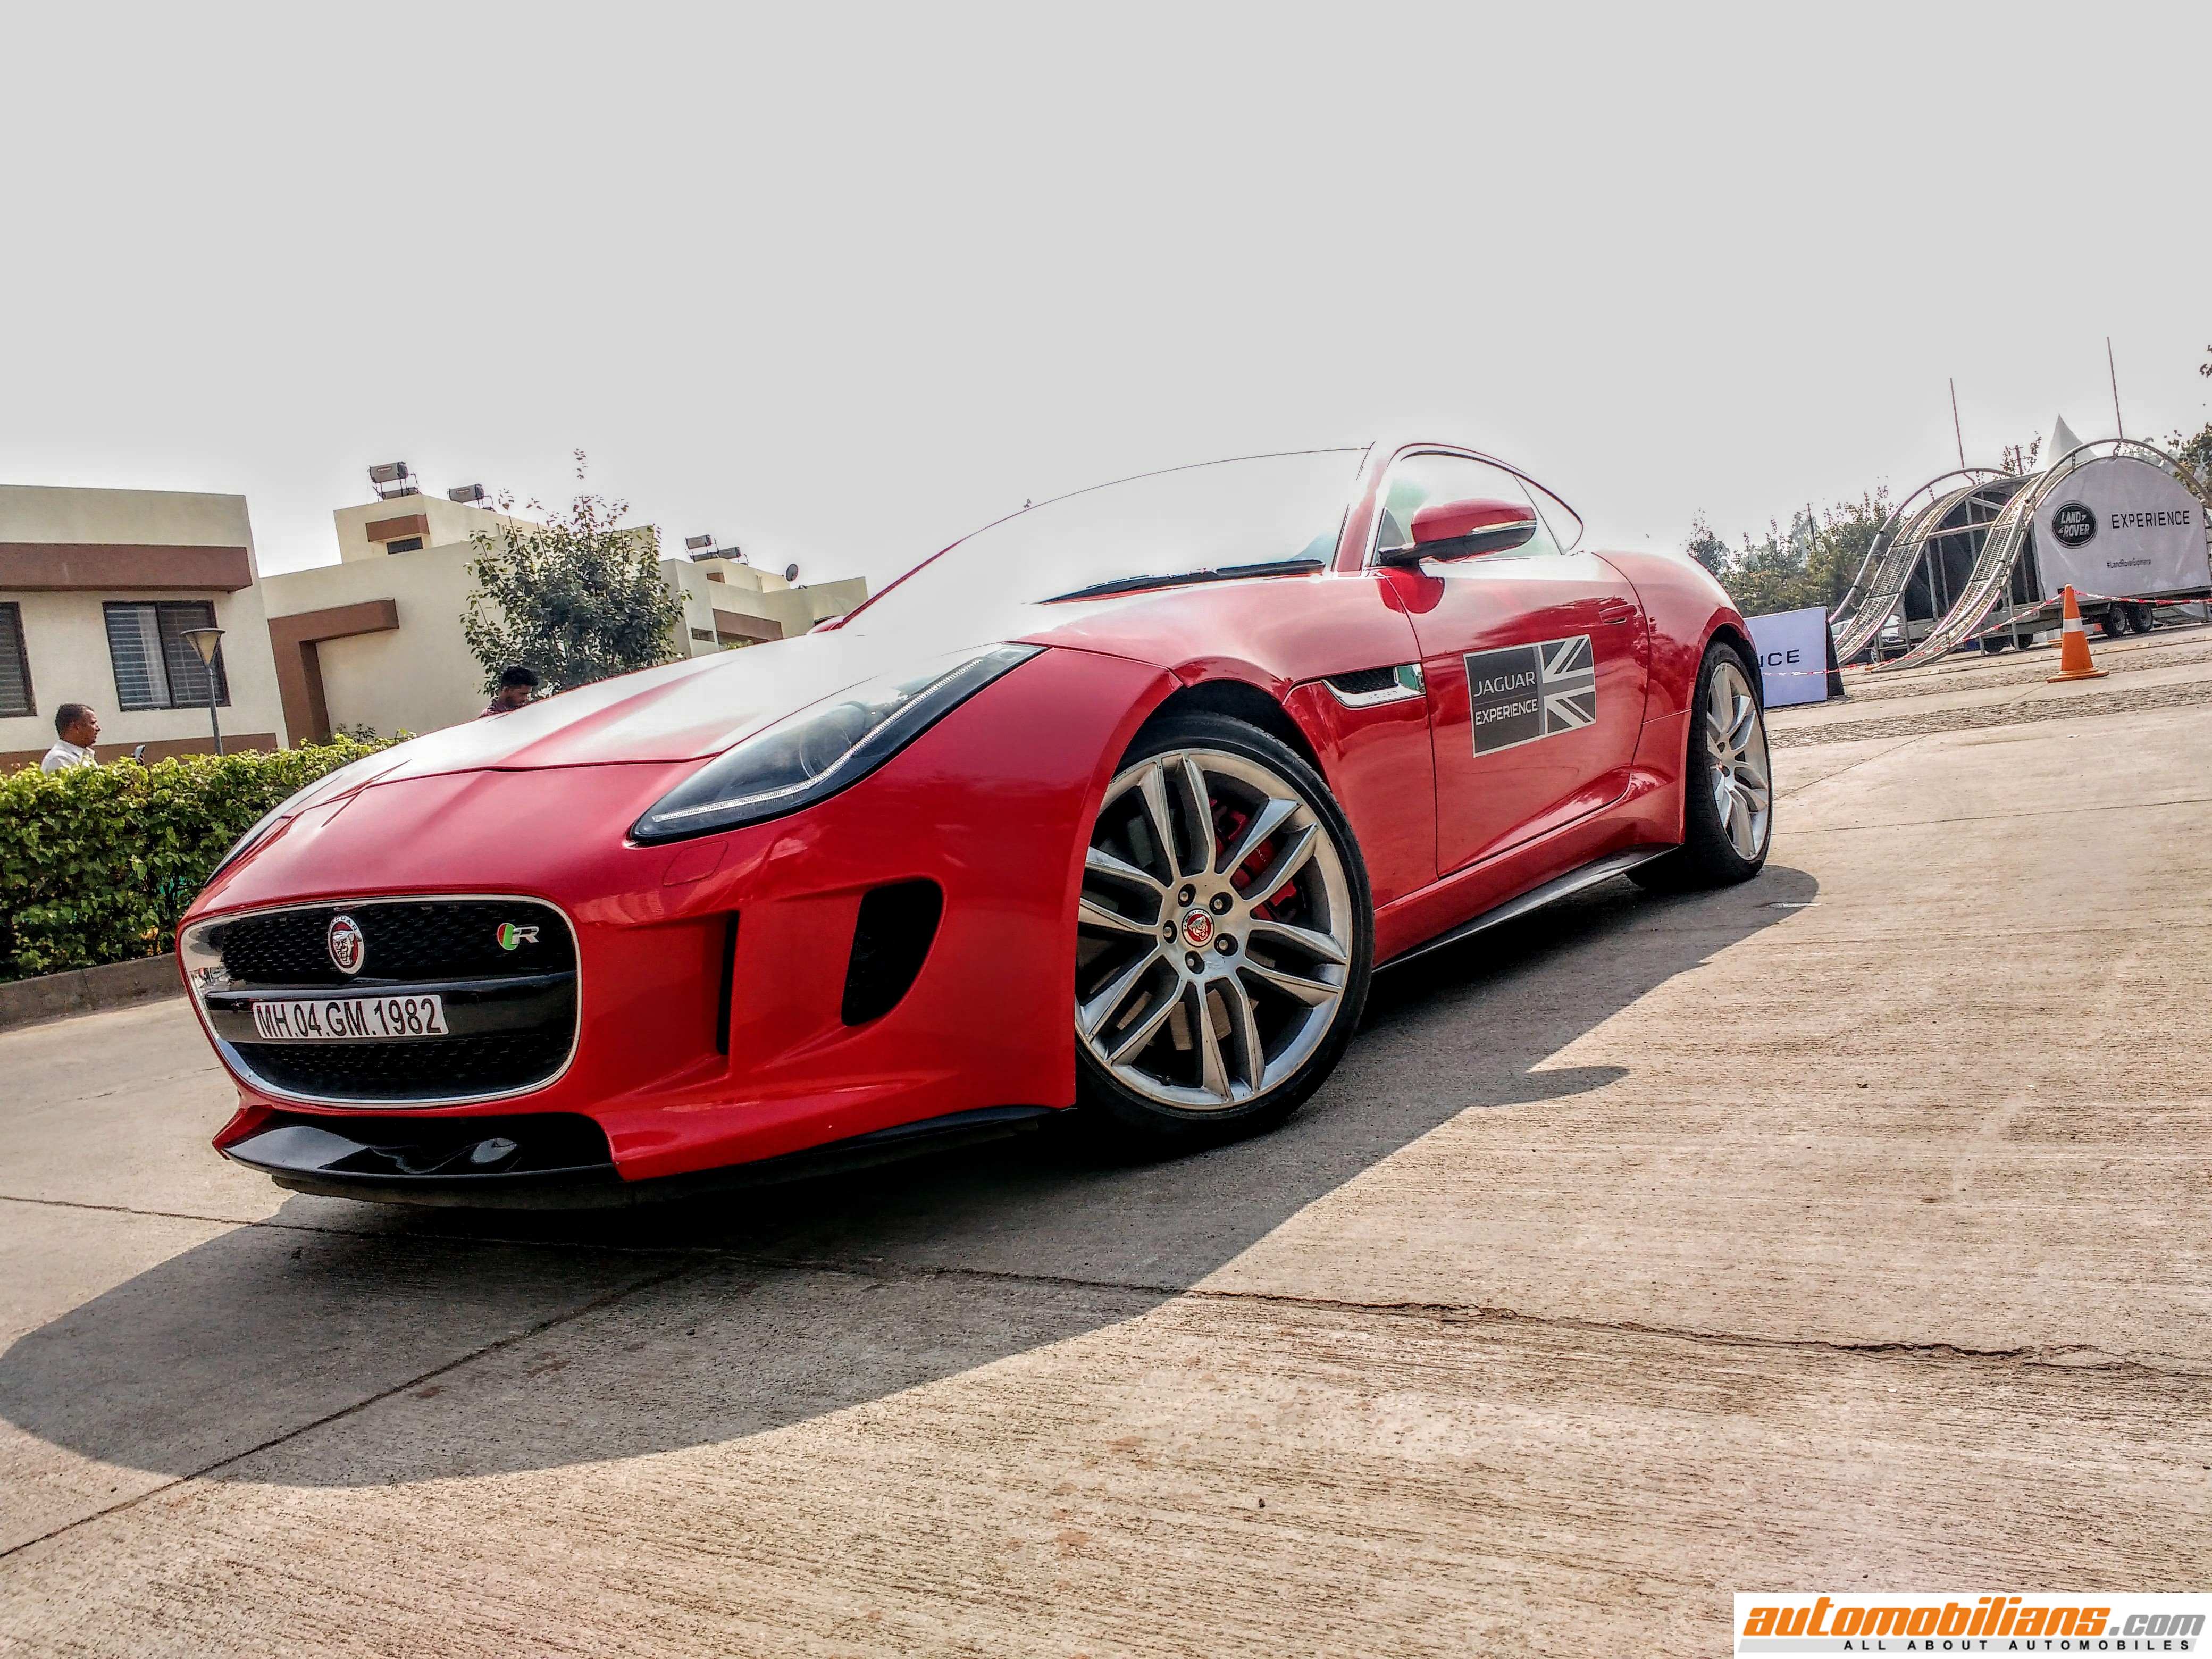 The Art Of Performance Tour By Jaguar In Pune – Experience Report